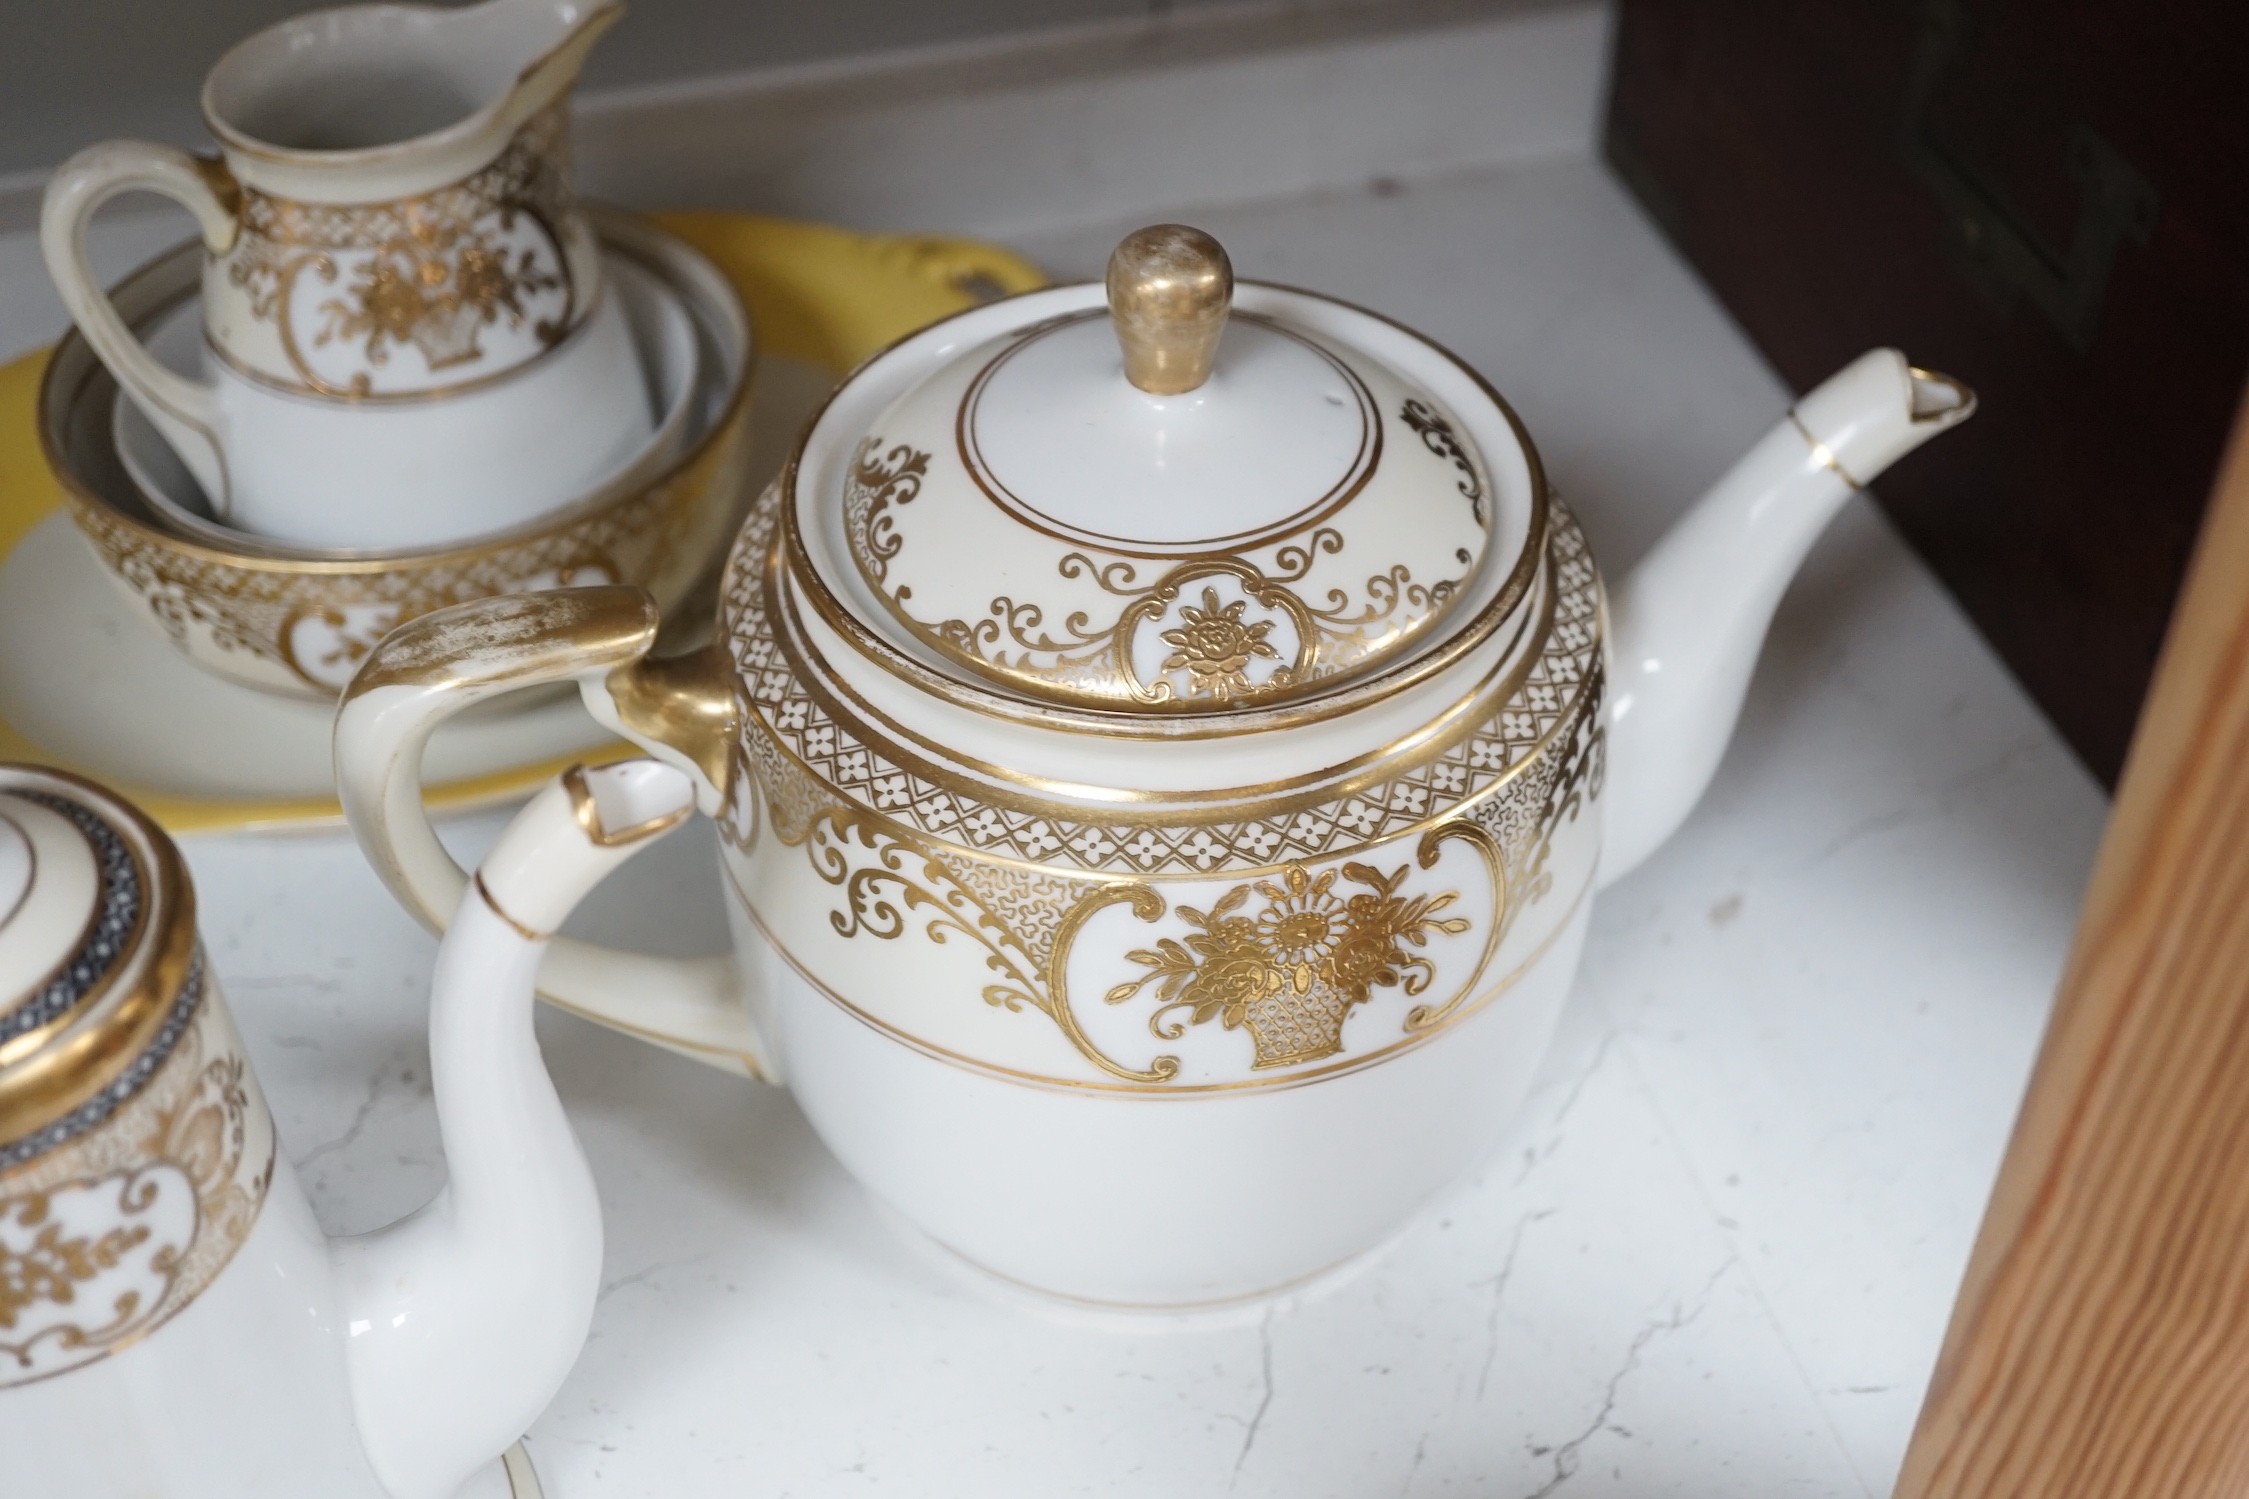 A Noritake tea and coffee set, pattern number 44318 - Image 7 of 9